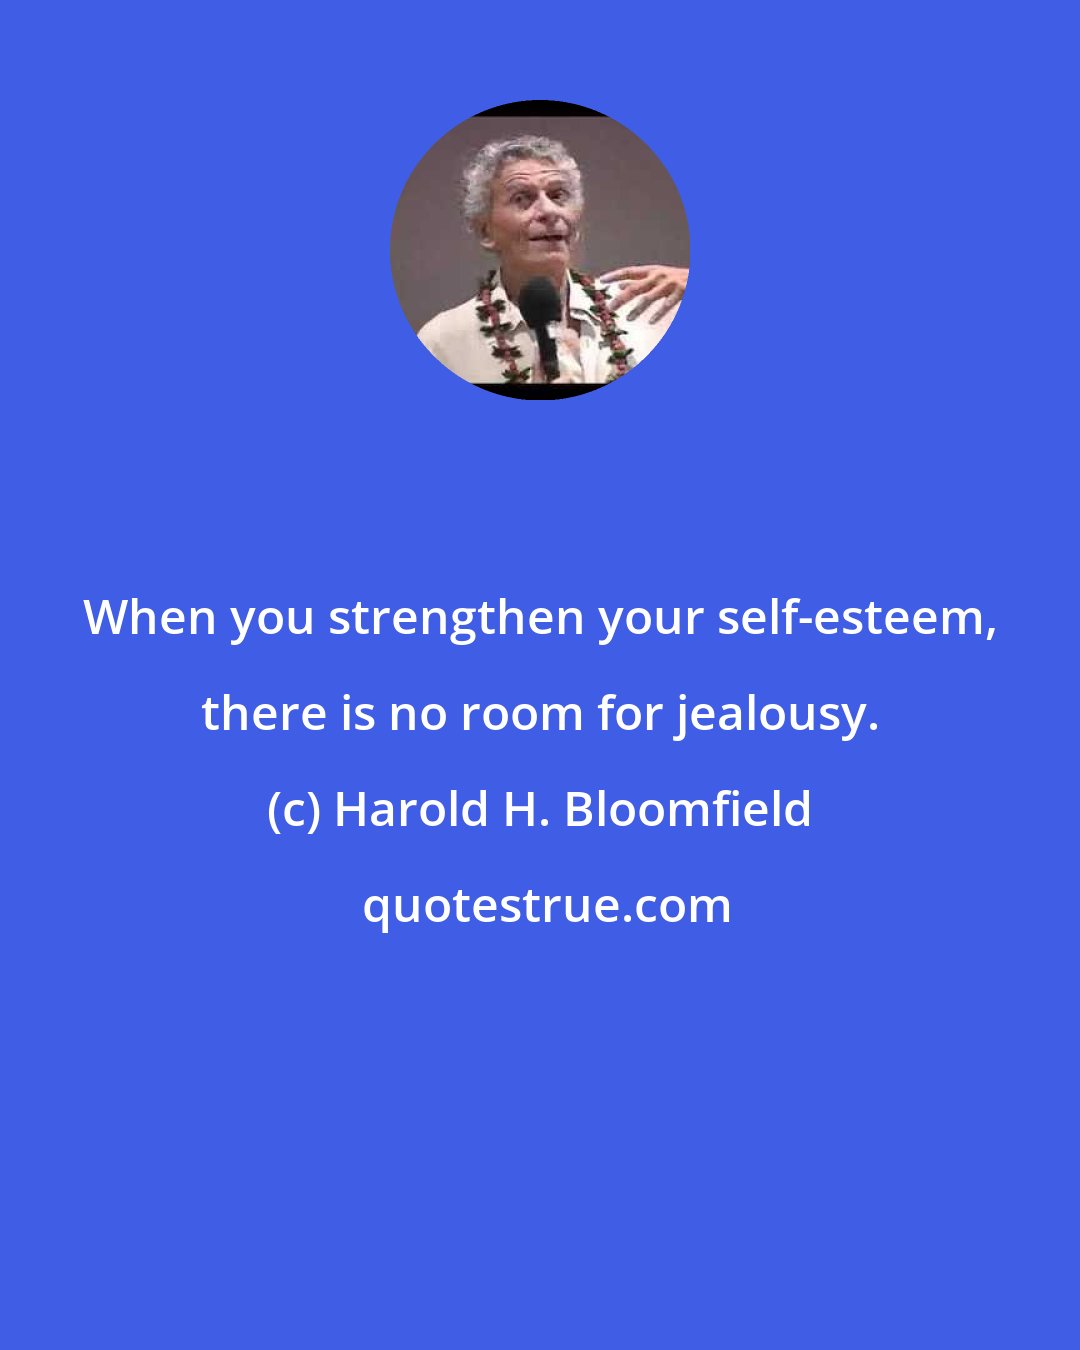 Harold H. Bloomfield: When you strengthen your self-esteem, there is no room for jealousy.